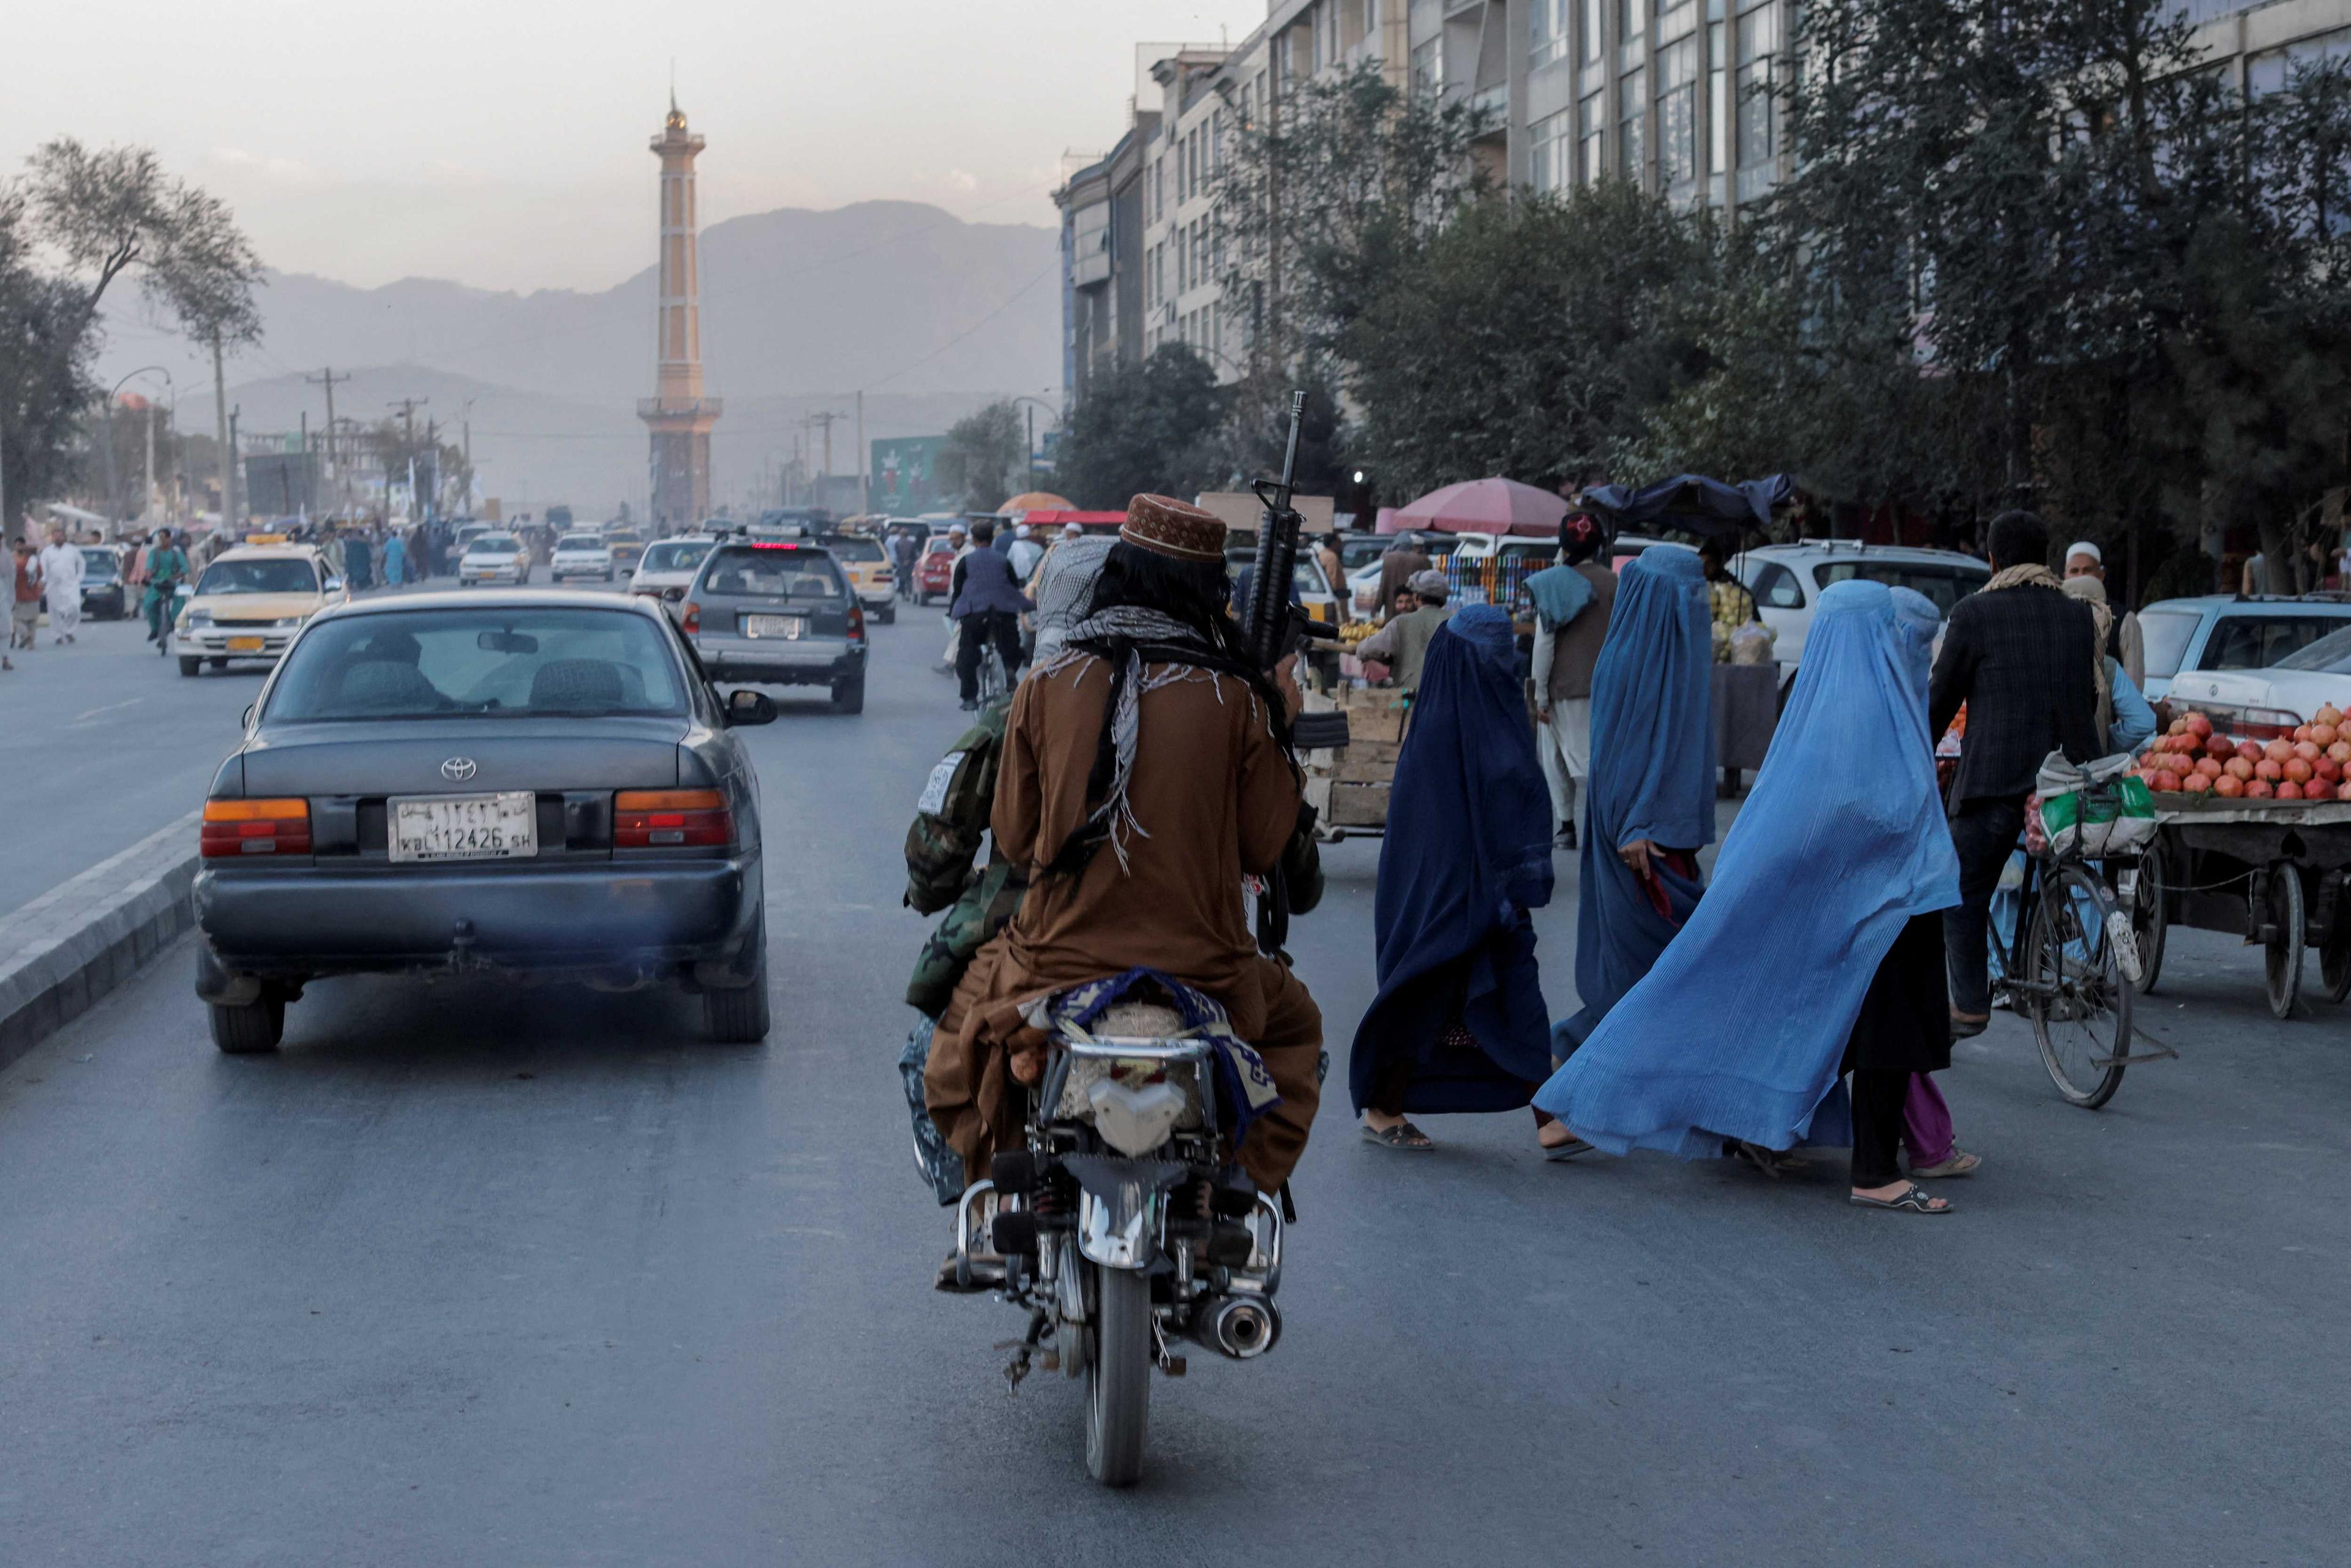 A group of women wearing burqas crosses the street as members of the Taliban drive past in Kabul, Afghanistan Oct 9, 2021. Photo: Reuters